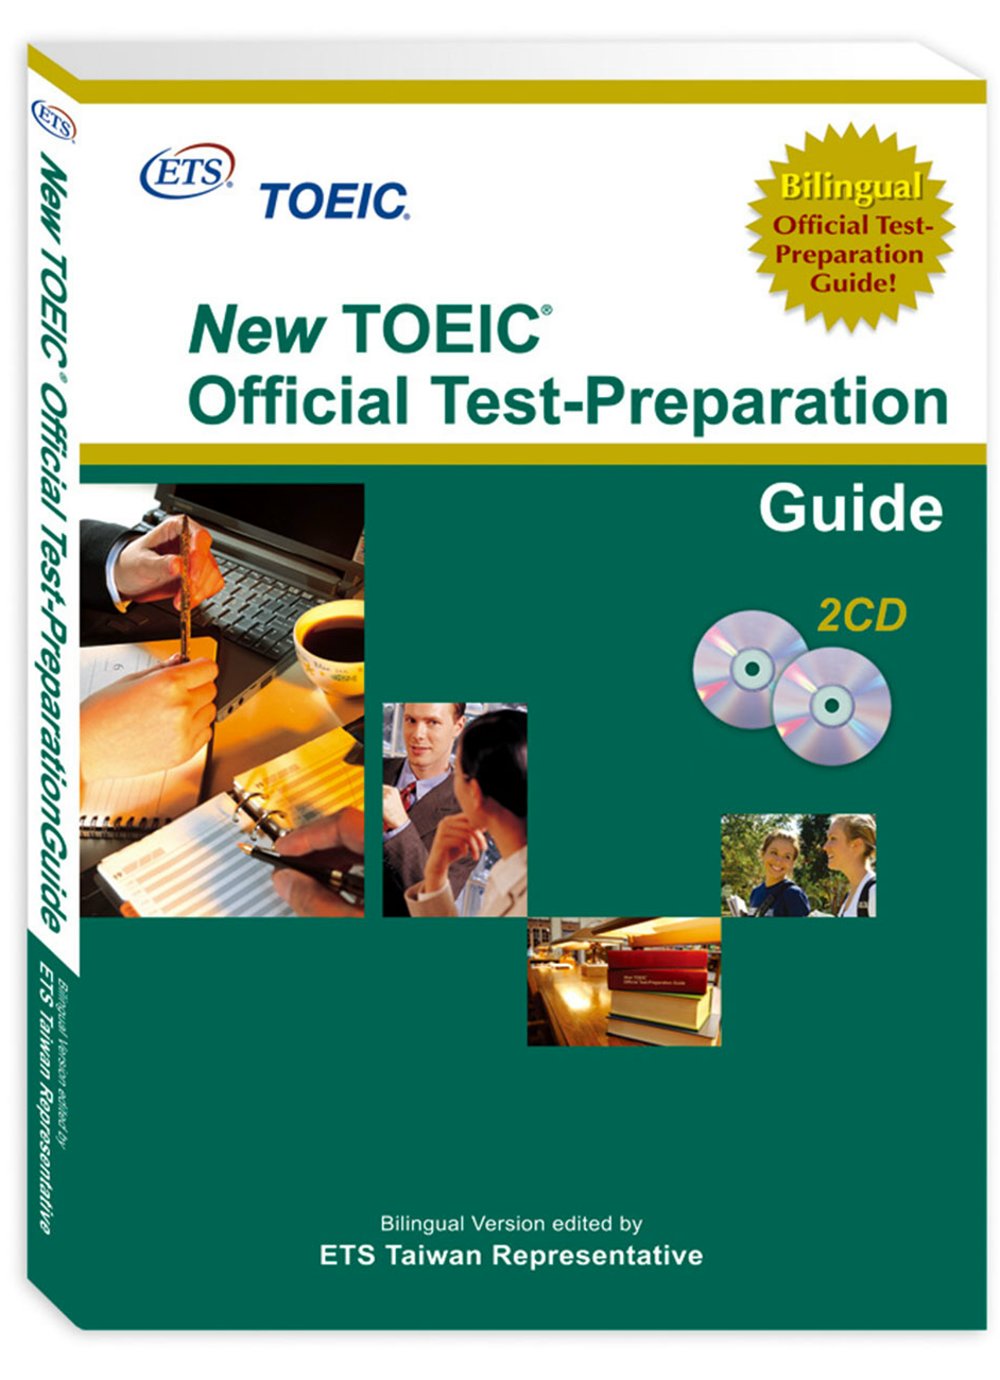 New TOEIC offical test preparation guide